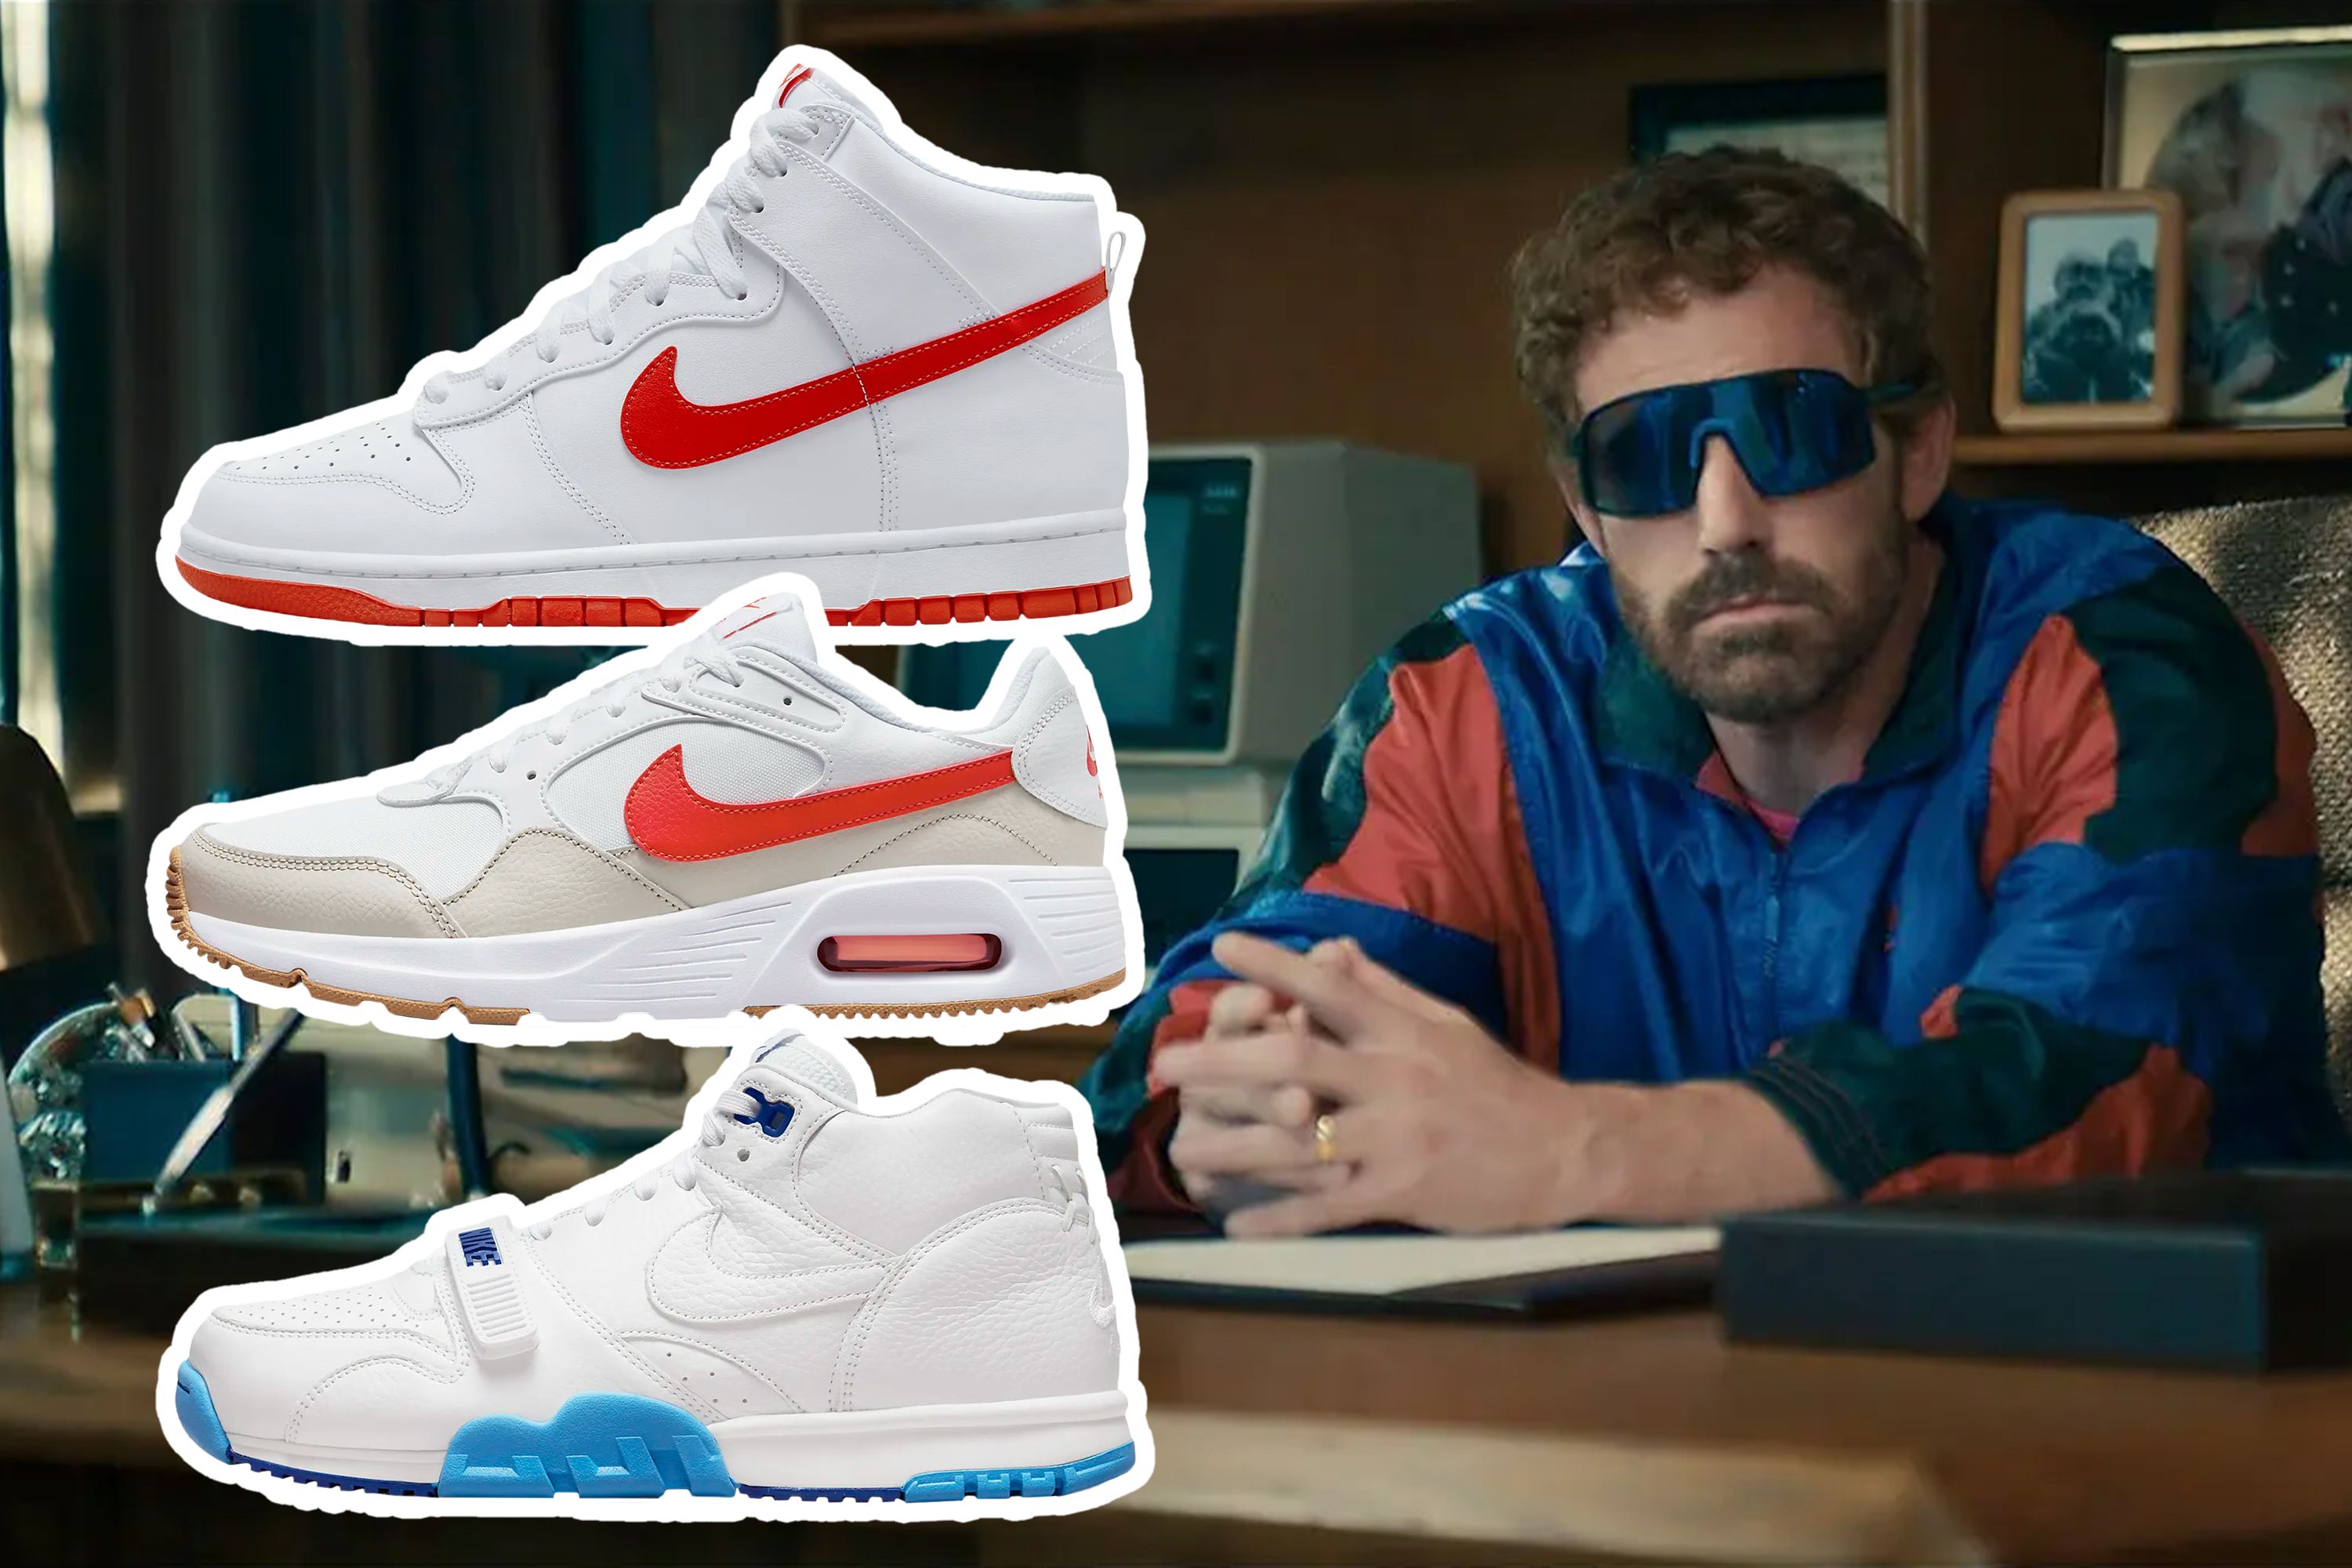 10 Sneakers You Can Buy Now That Capture the 1980s Vibes of 'Air'